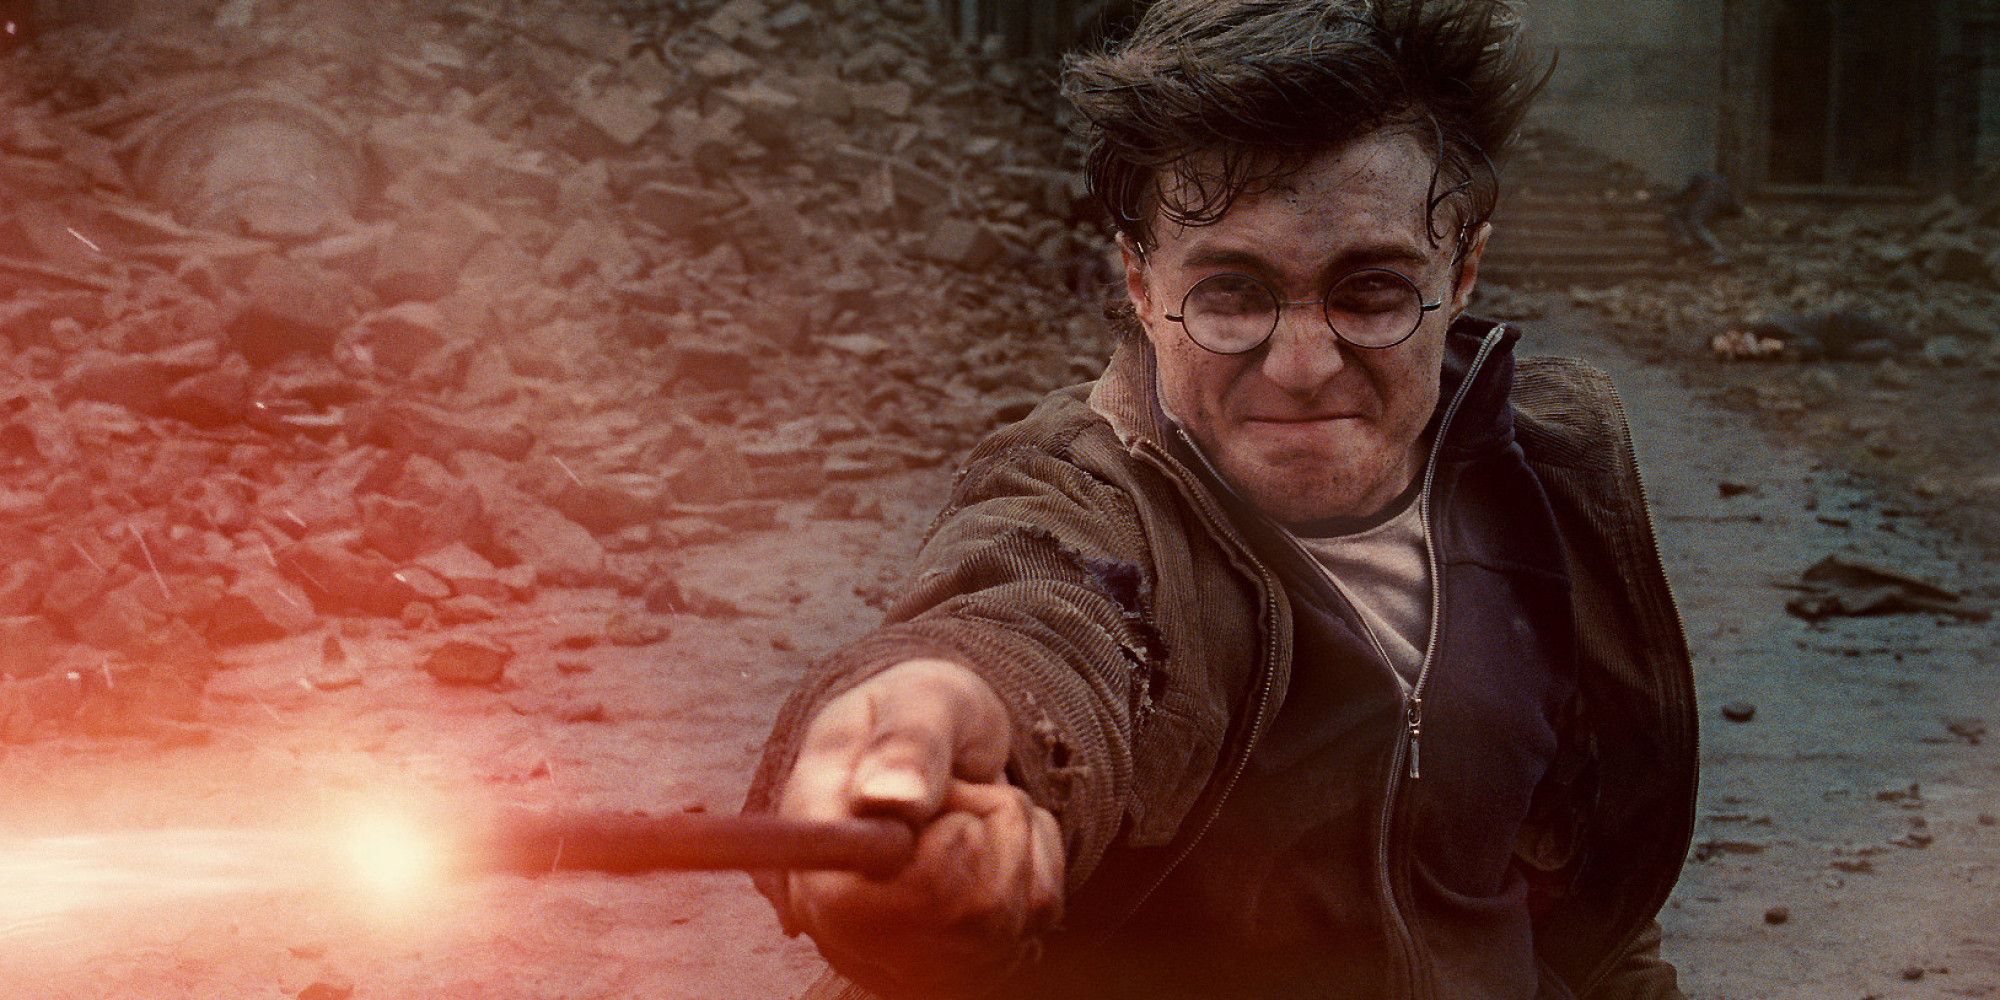 Harry Potter fighting in the battle of Hogwarts in 'Harry Potter and the Deathly Hallows - Part 2'